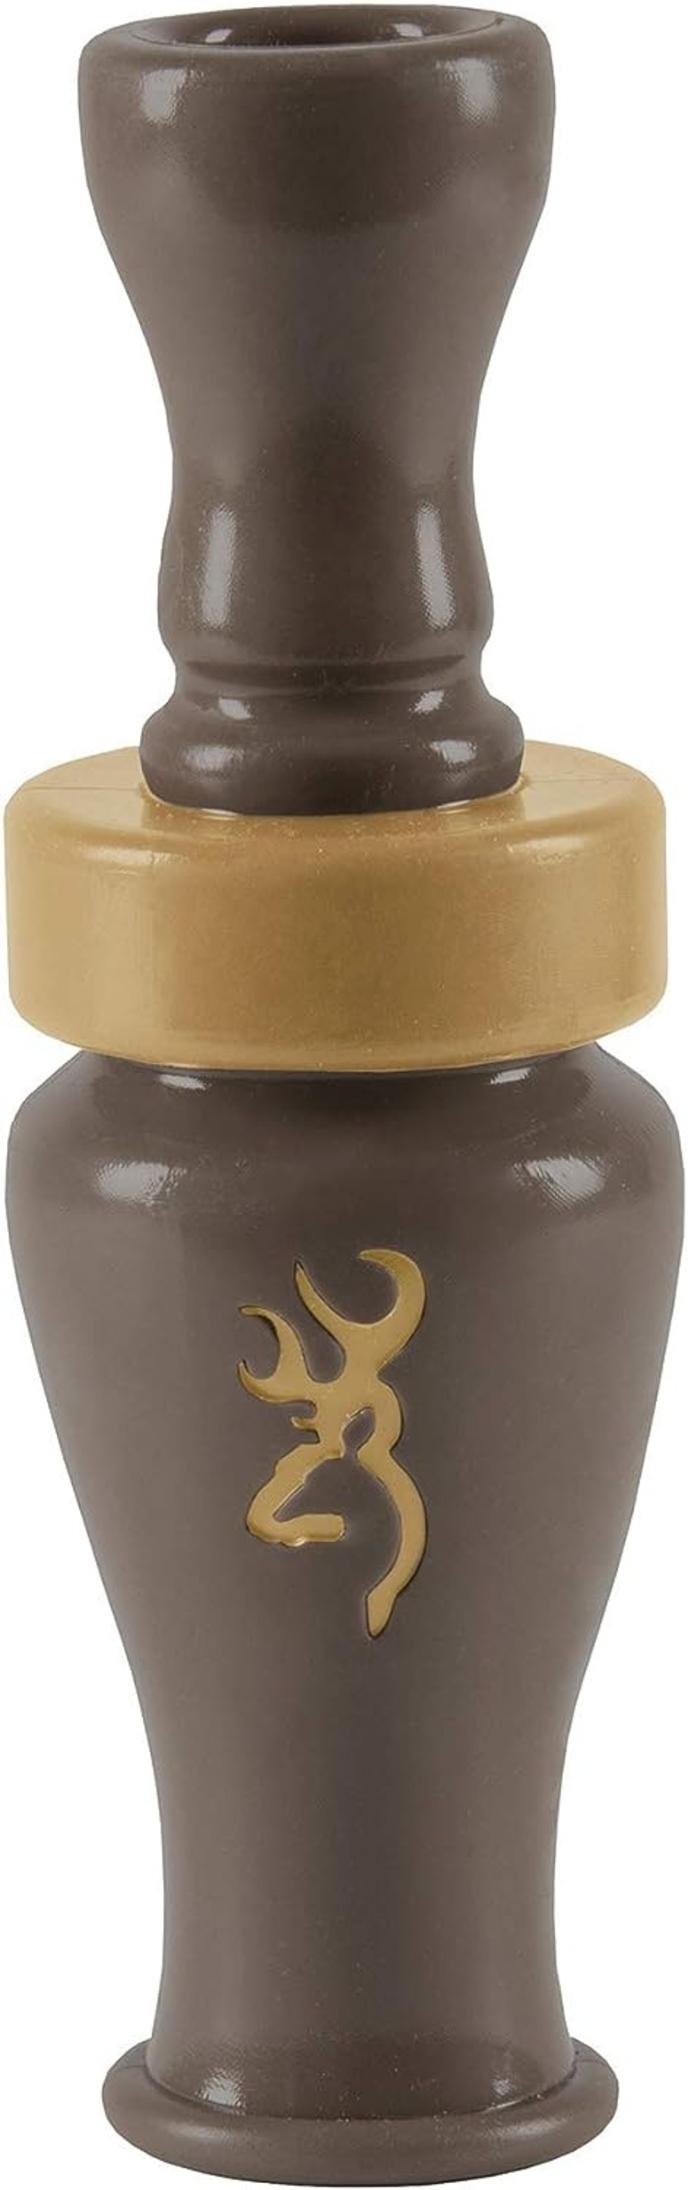 Browning Duck Call Squeaker Toy